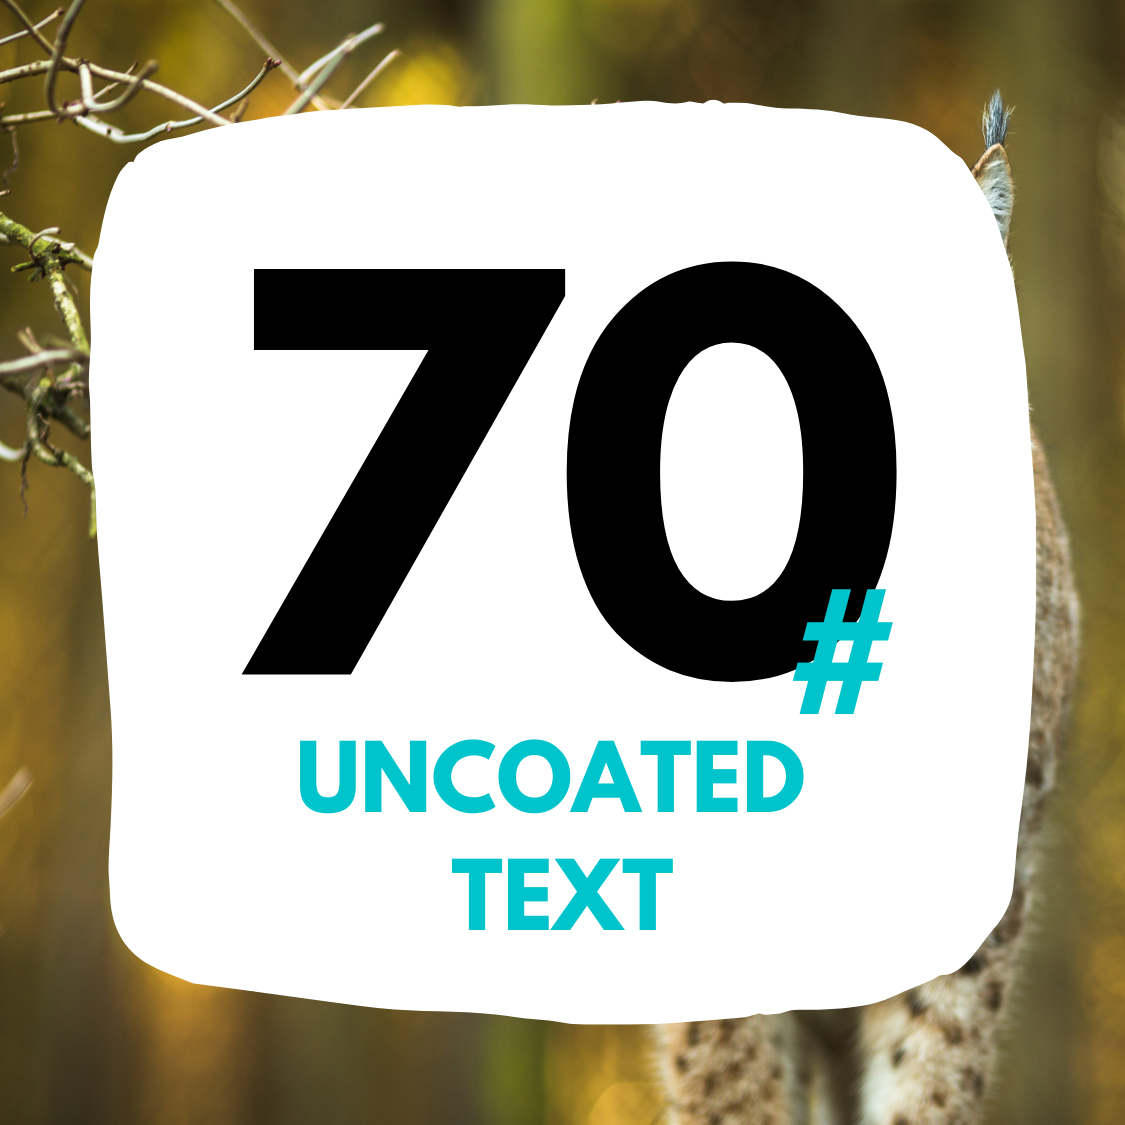 70# Uncoated Text